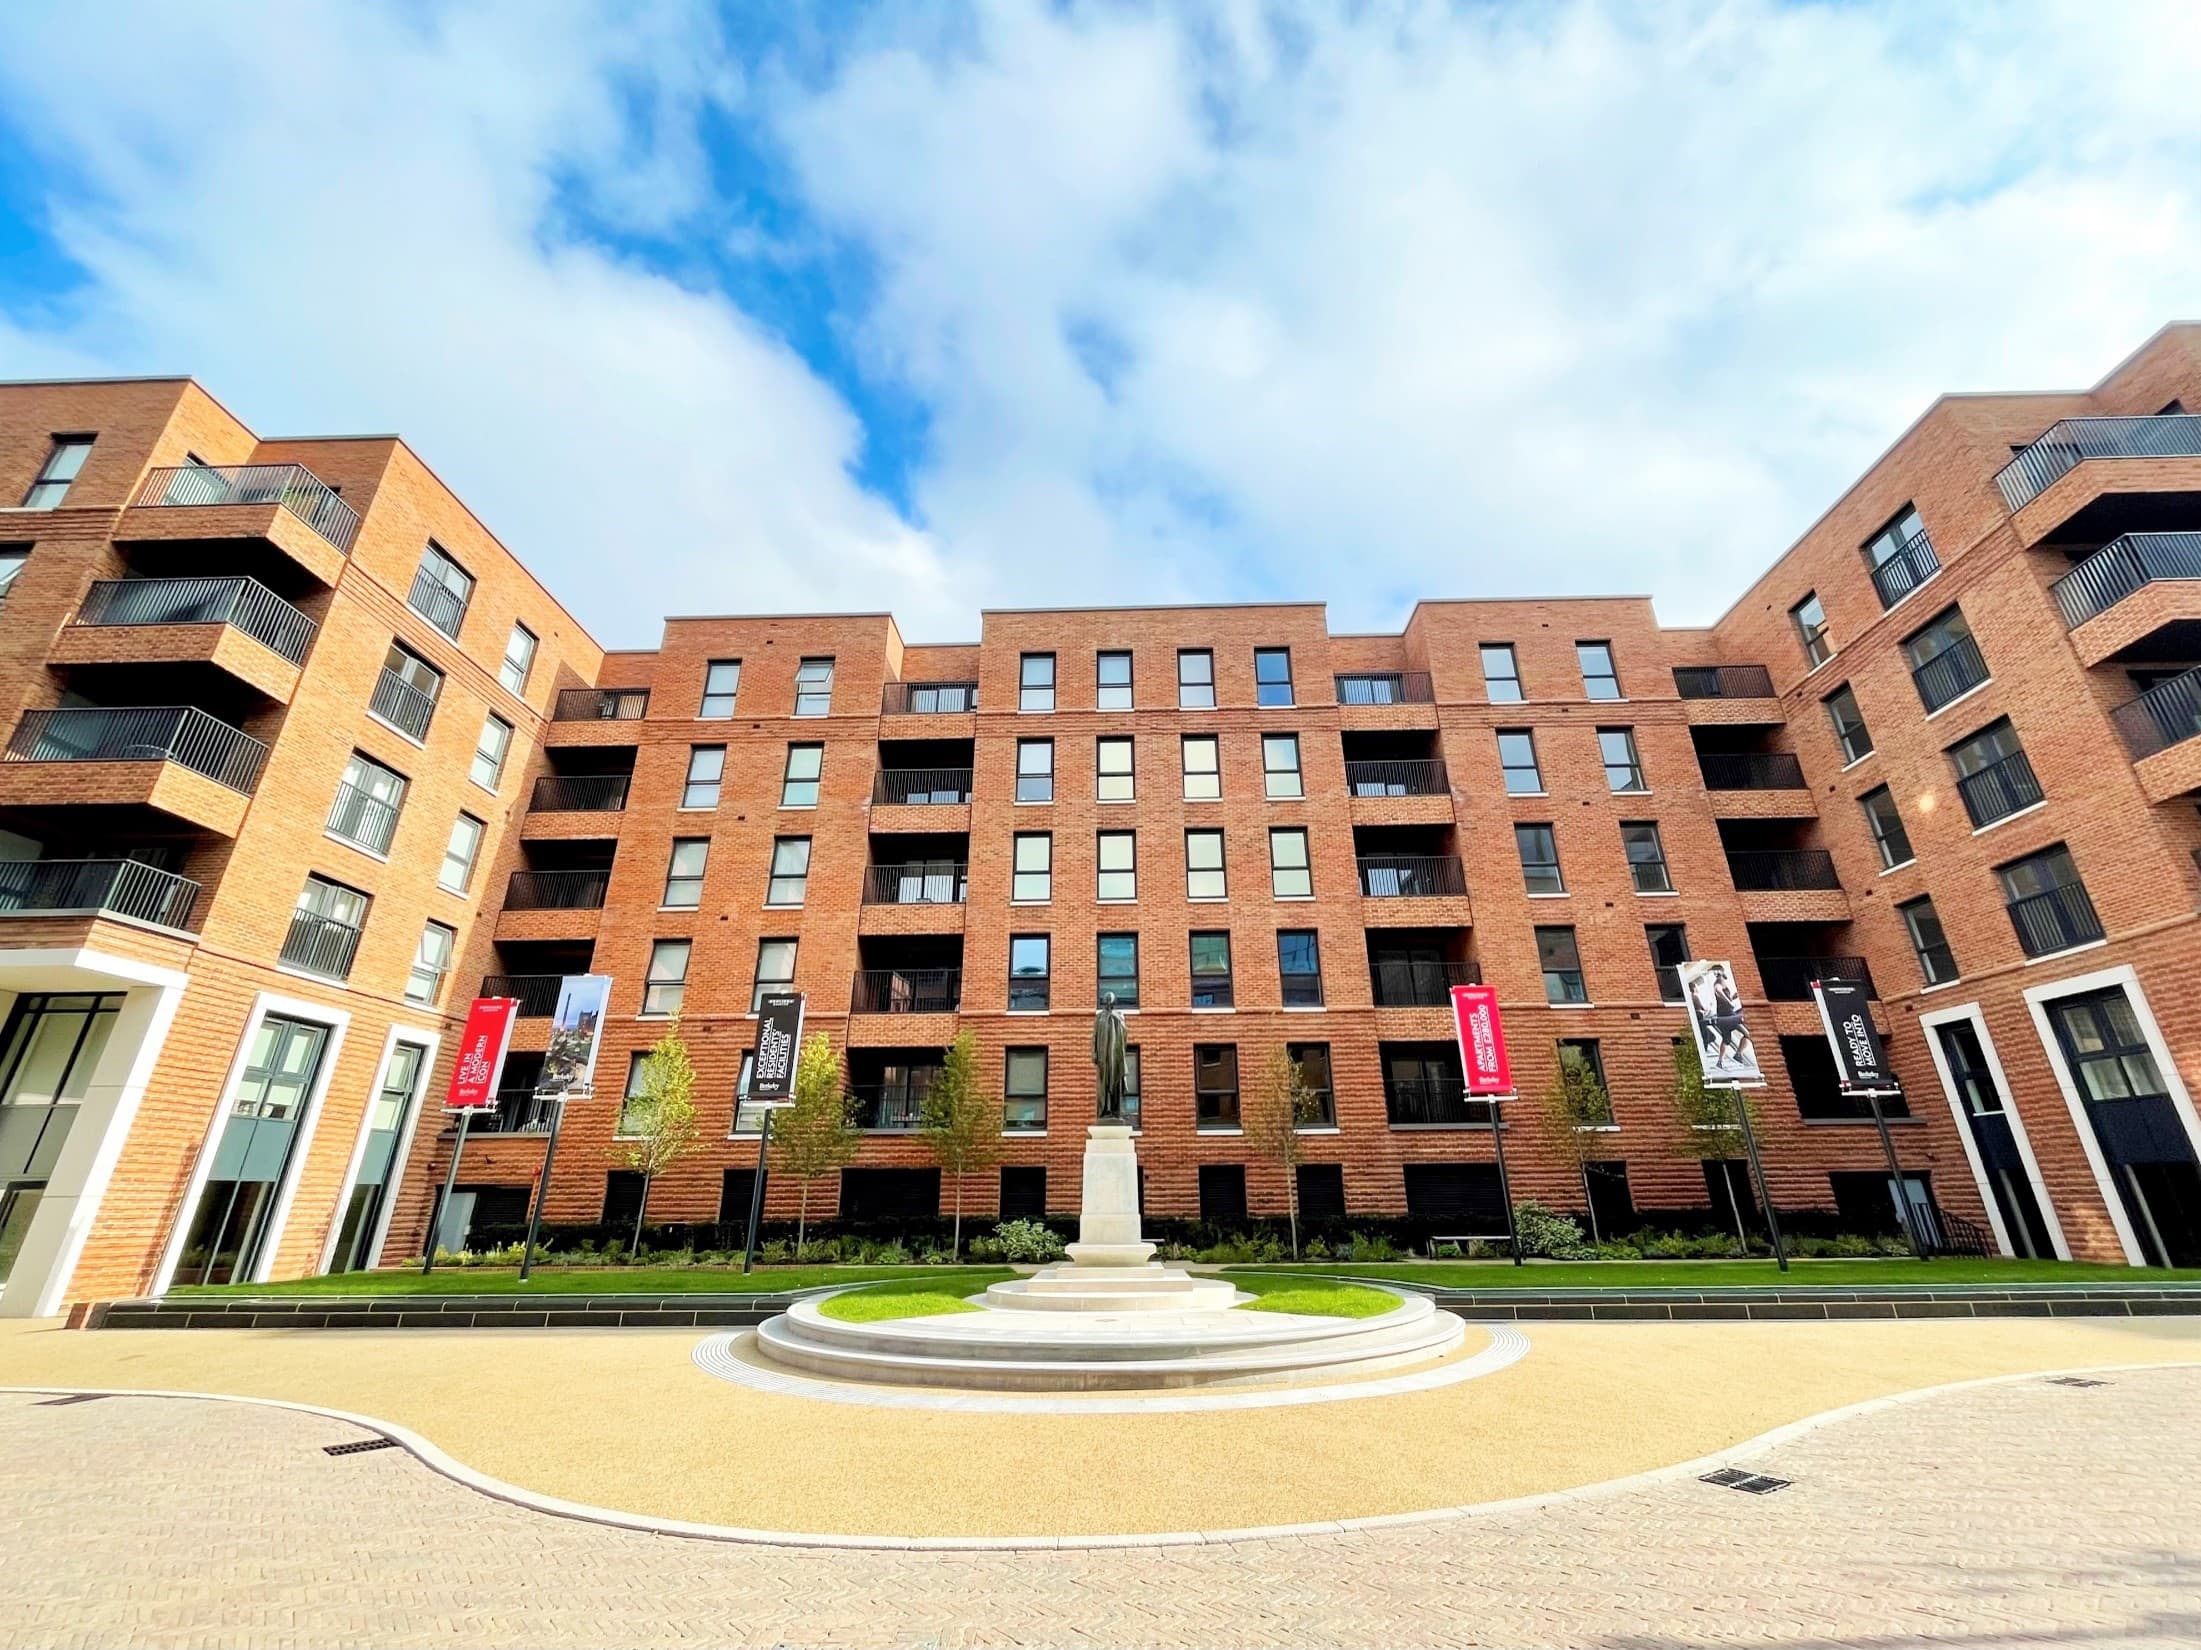 Image of the Horlicks Quarter development by Sovereign - available to purchase through Shared Ownership on Share to Buy!